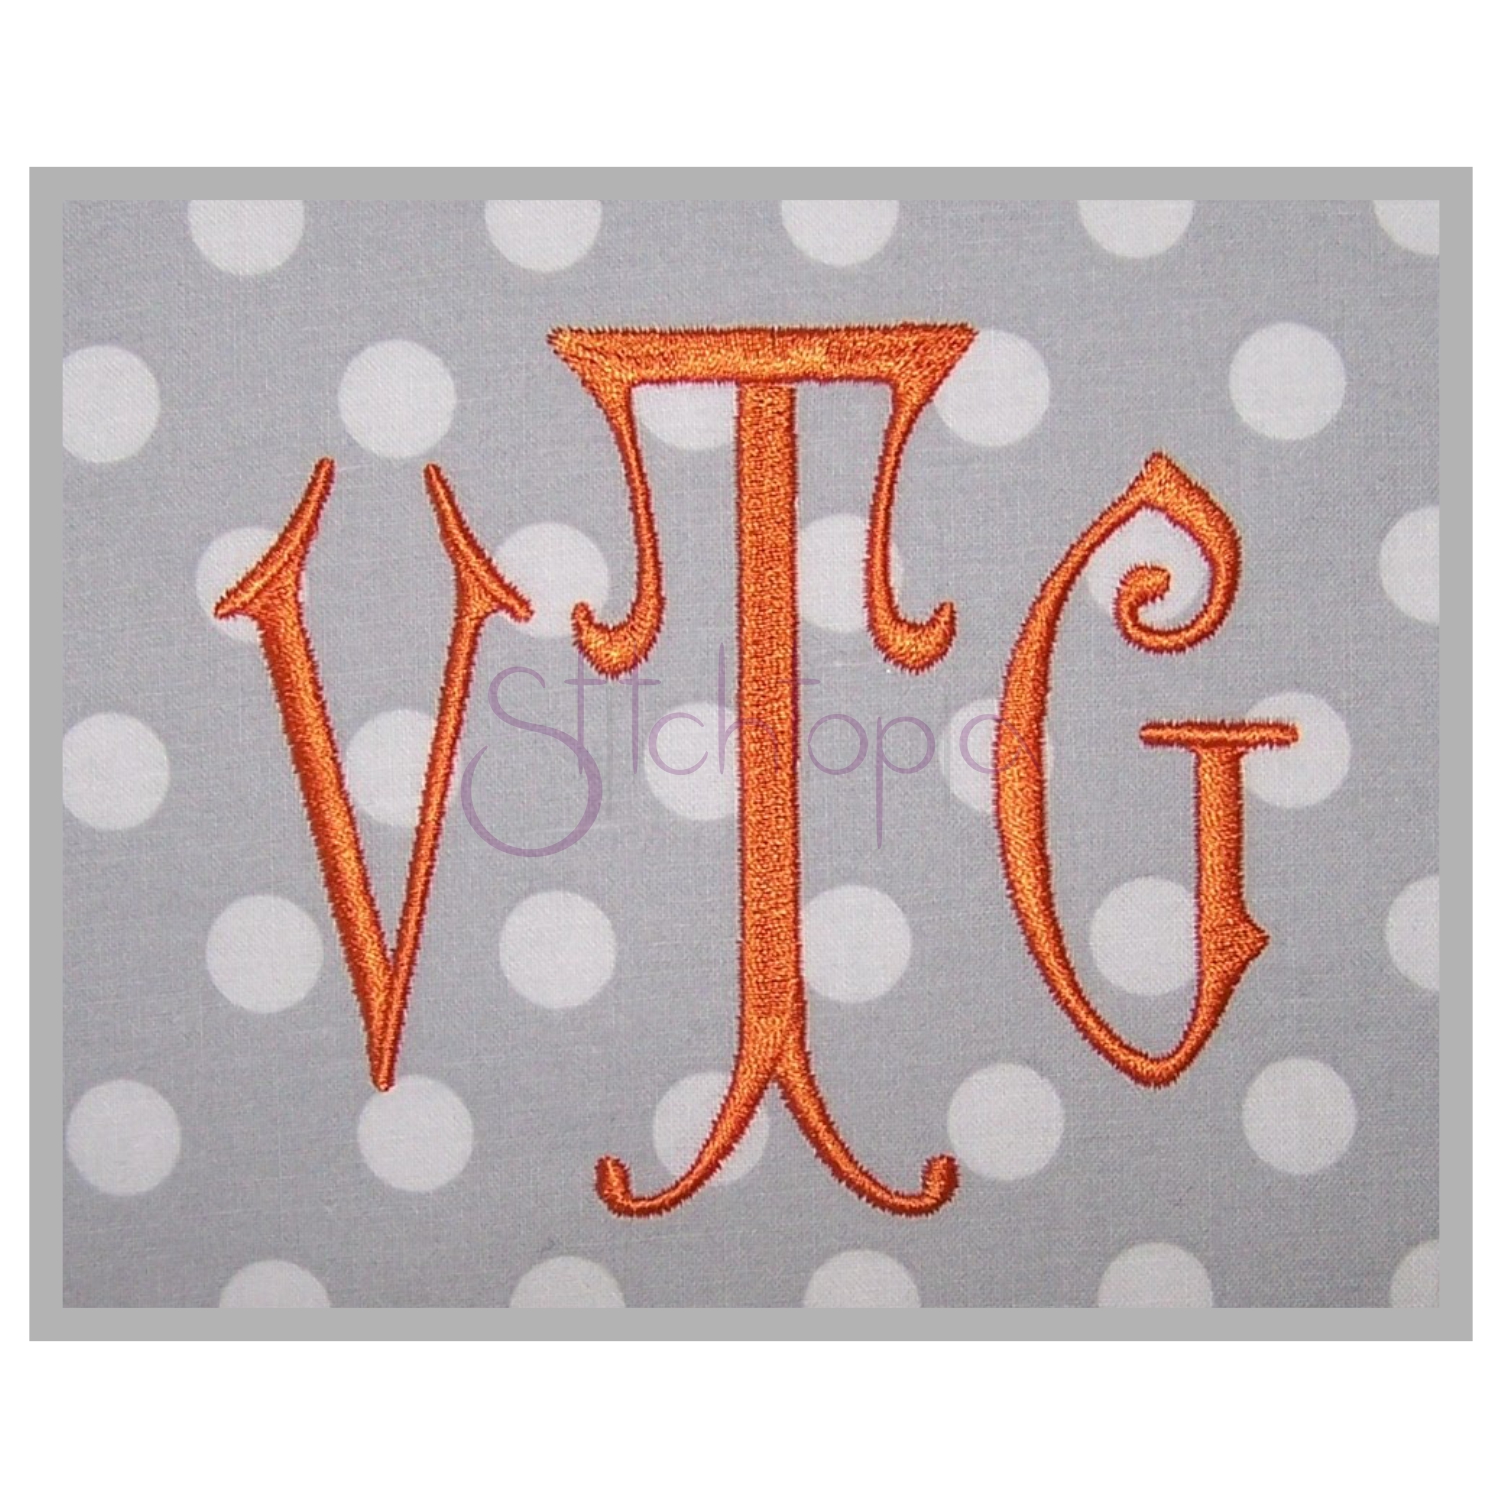 bx dst exp hus jef pes sew shv vip vp3 xxx Machine Embroidery Instant Download Lovely Embroidery Monogram Font 4 4.5 5 6 7 8 Formats